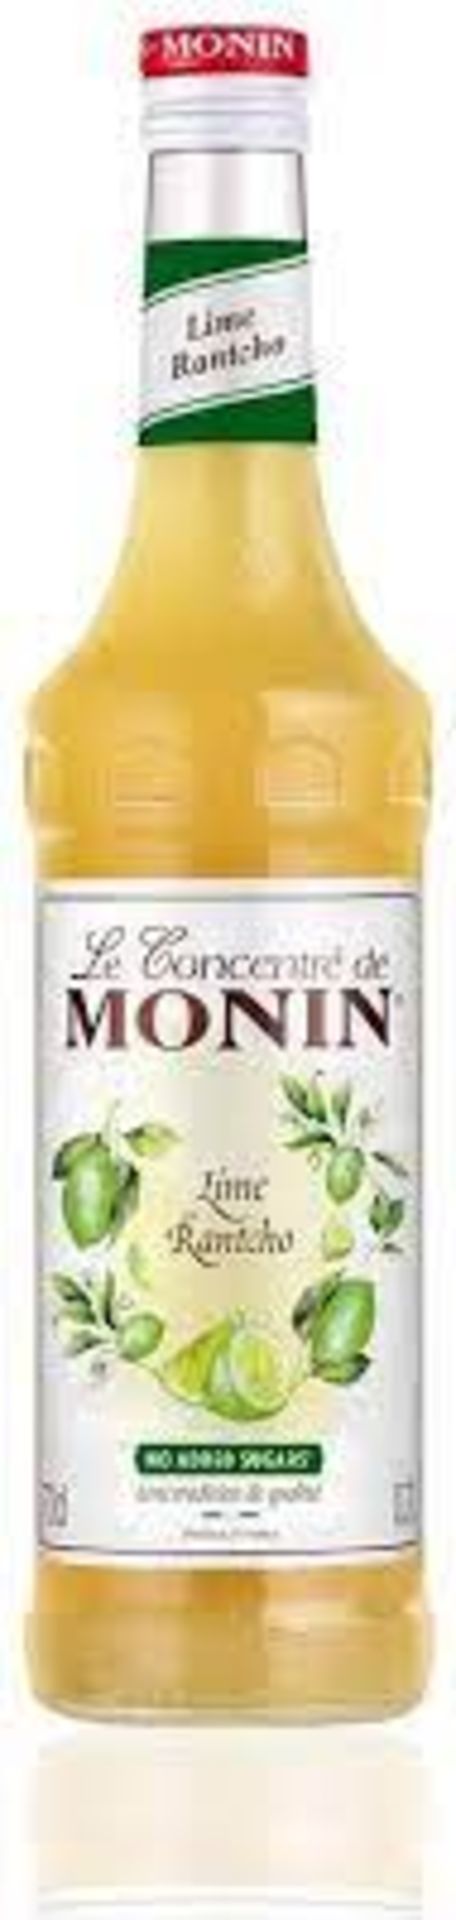 RRP £995 (Approx, Count 78) (A54) Spw30E6711K 1 X Monin Lime Rantcho Concentrate Syrups And Cordials